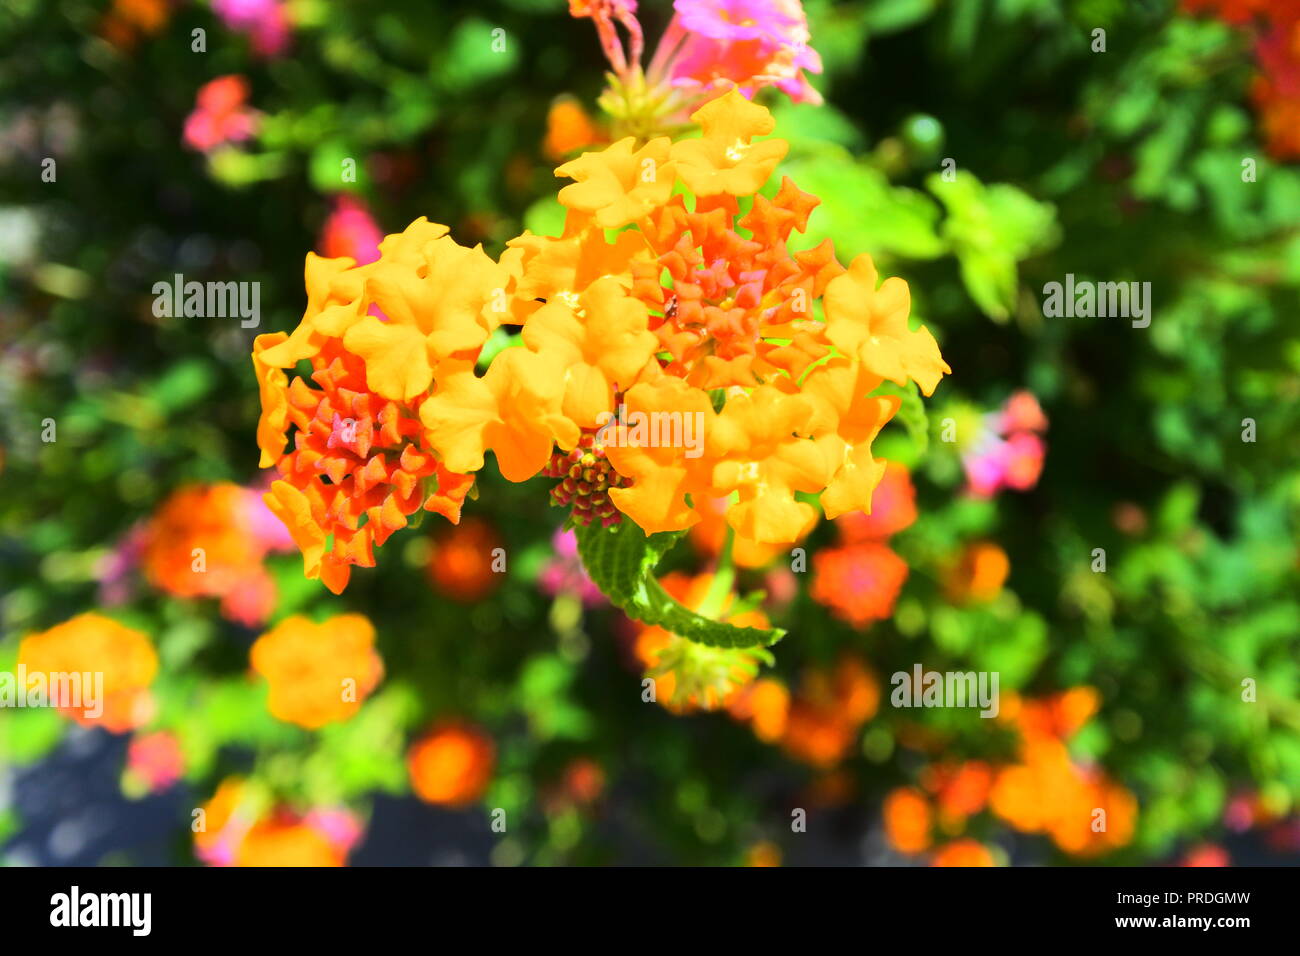 Colorful Yellow Summer Flower Stock Photo